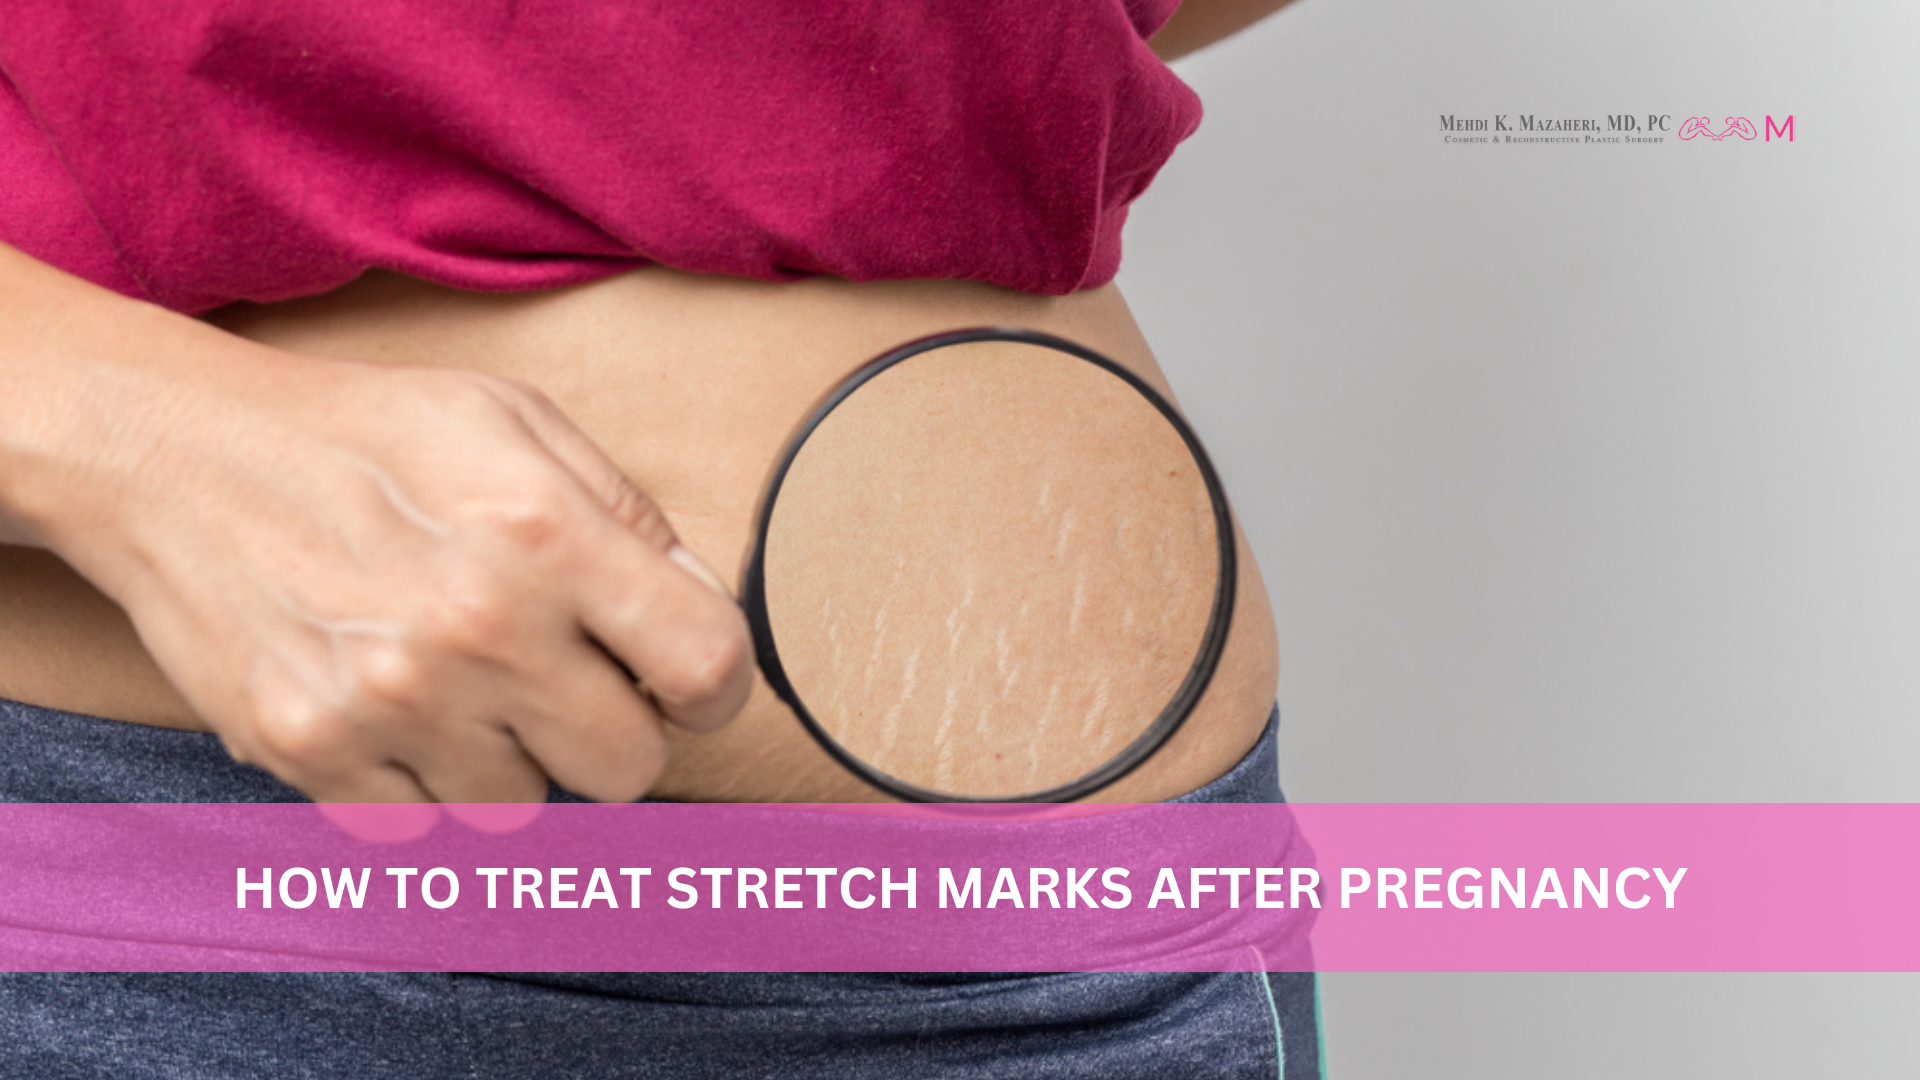 How to Treat Stretch Marks After Pregnancy